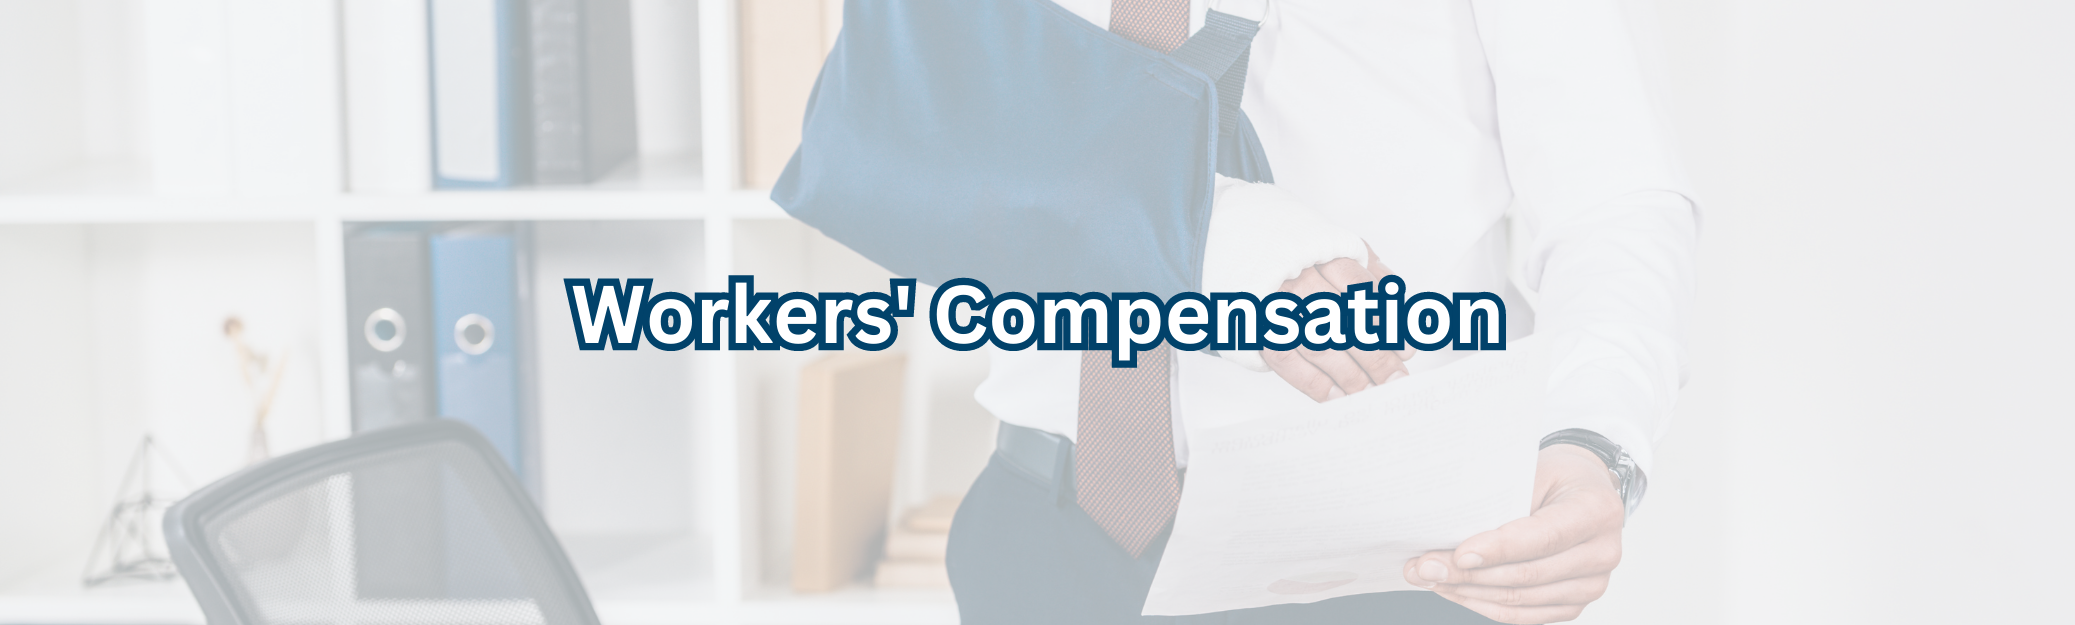 workers comp banner